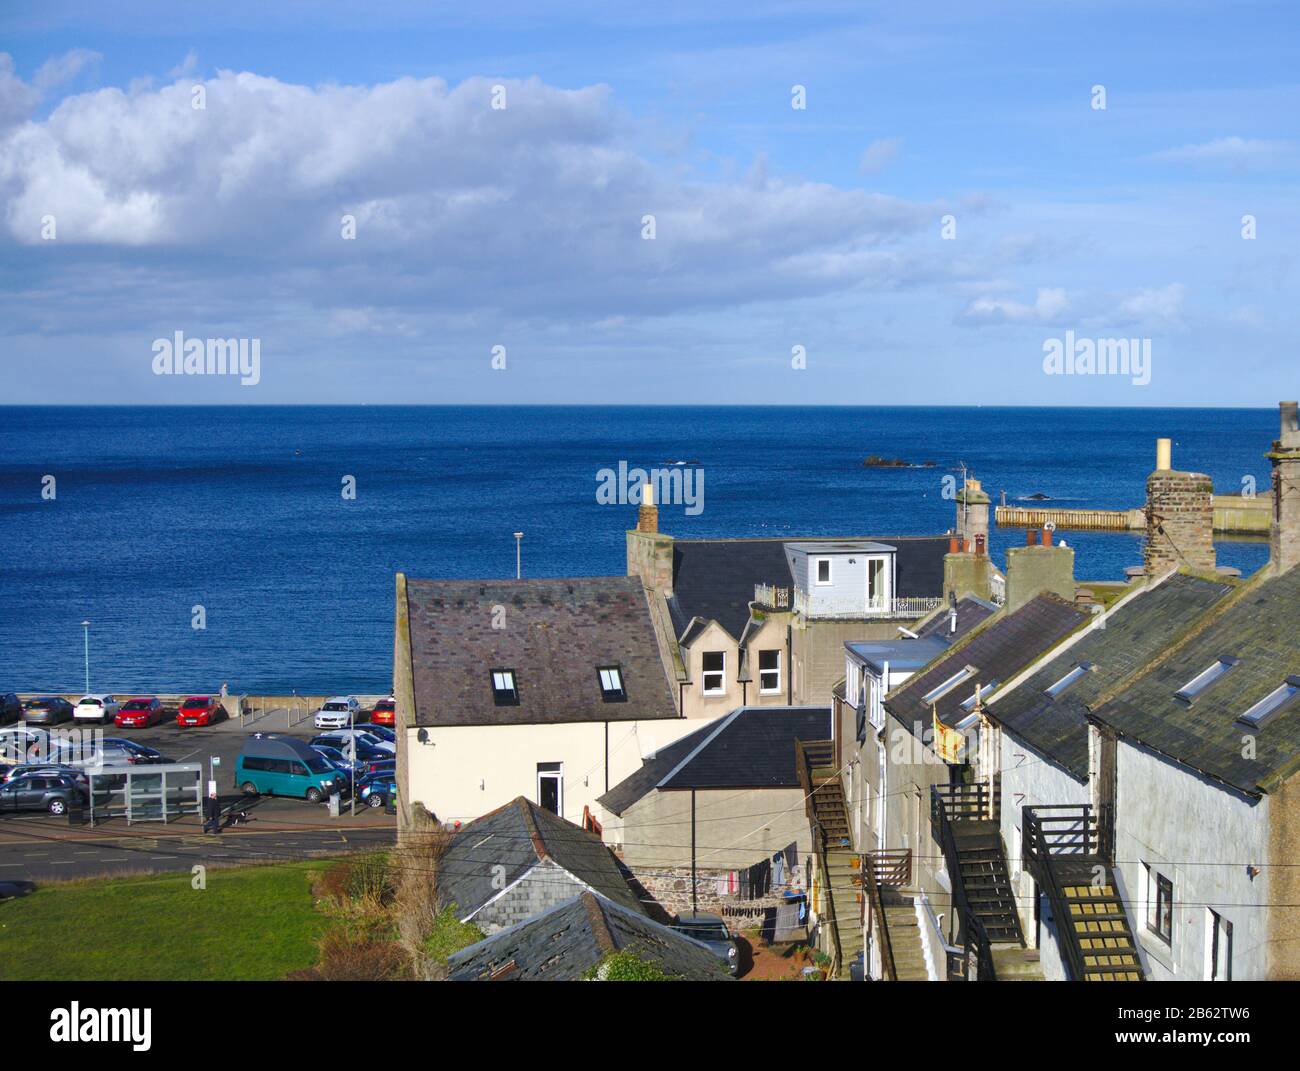 View across the bay to the North Sea over houses and car park from Eyemouth, Berwickshire, Scottish Borders, UK Stock Photo